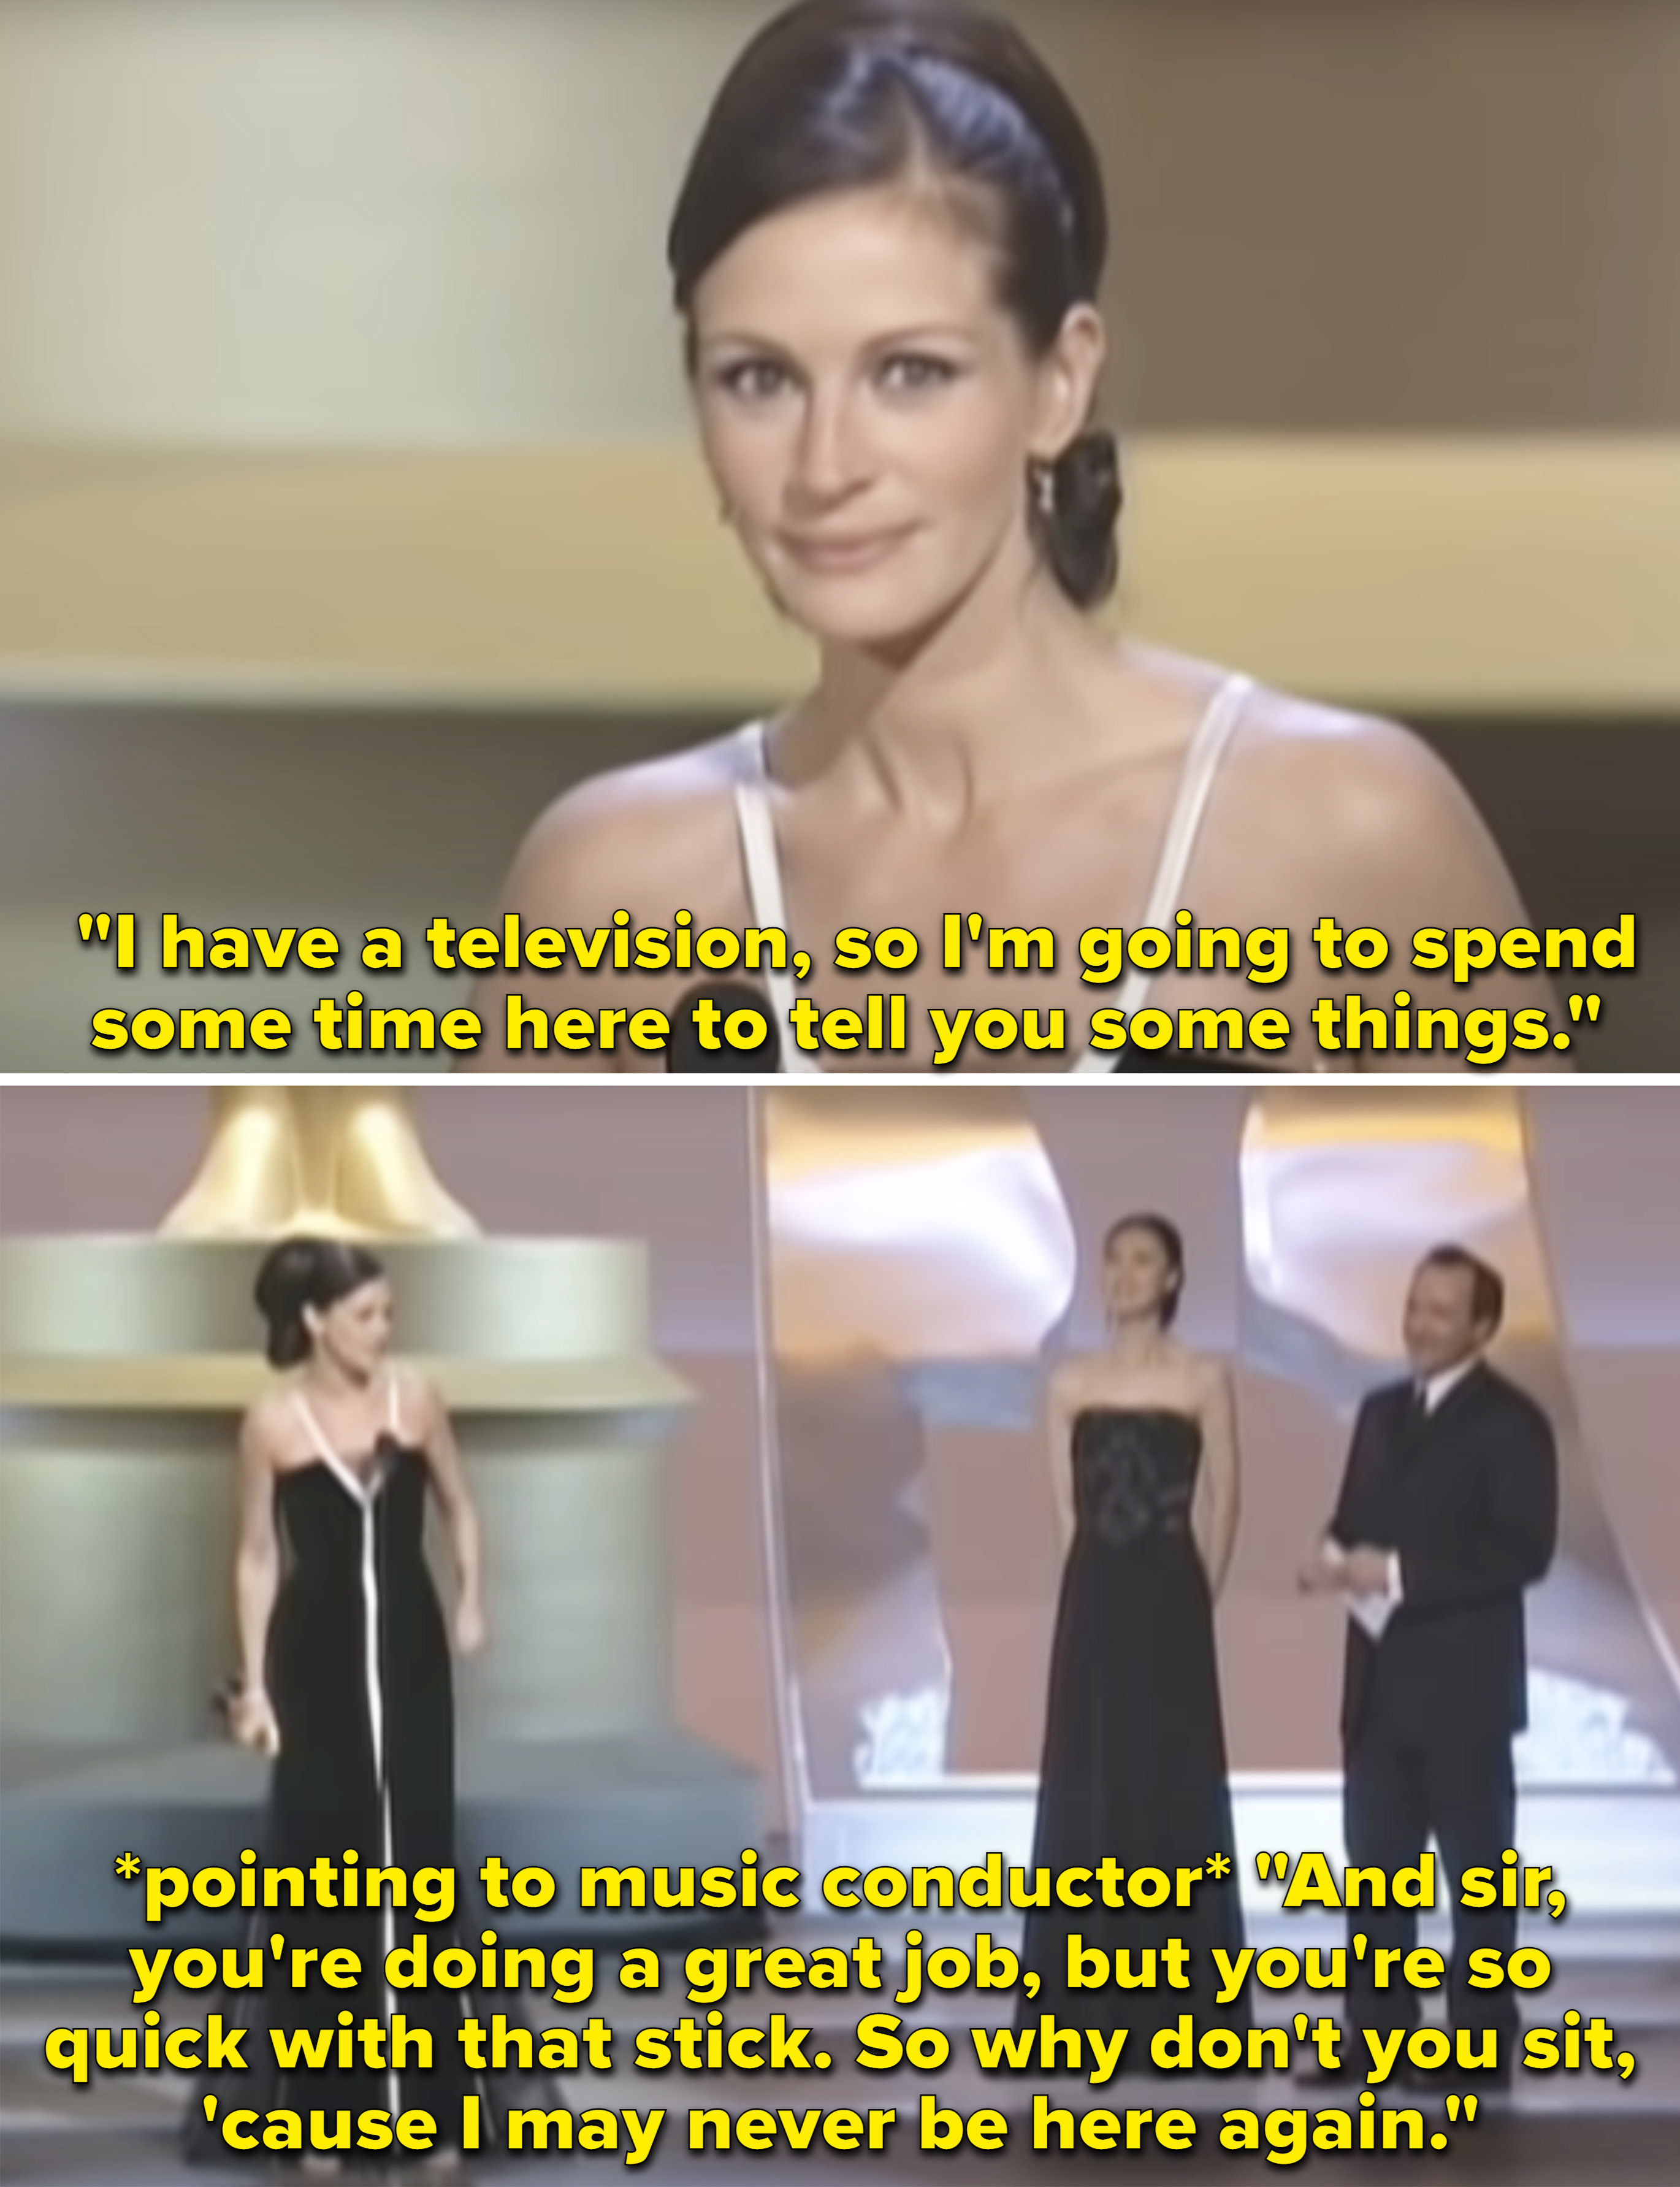 Julia Roberts accepting her award and telling the music conductor to not play her off